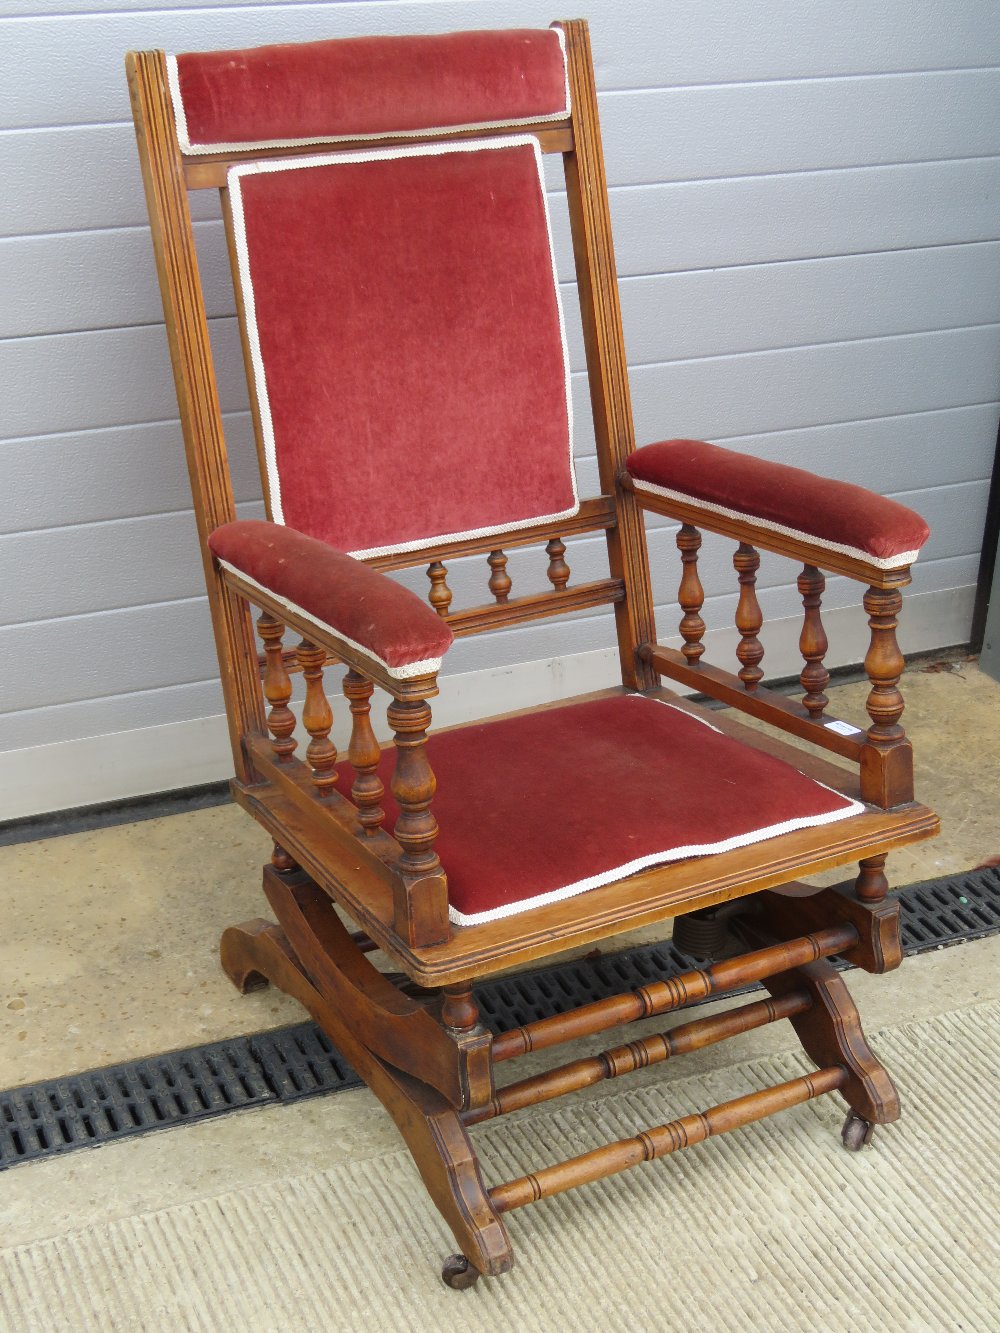 An early 20th century American rocking chair raised over castors.